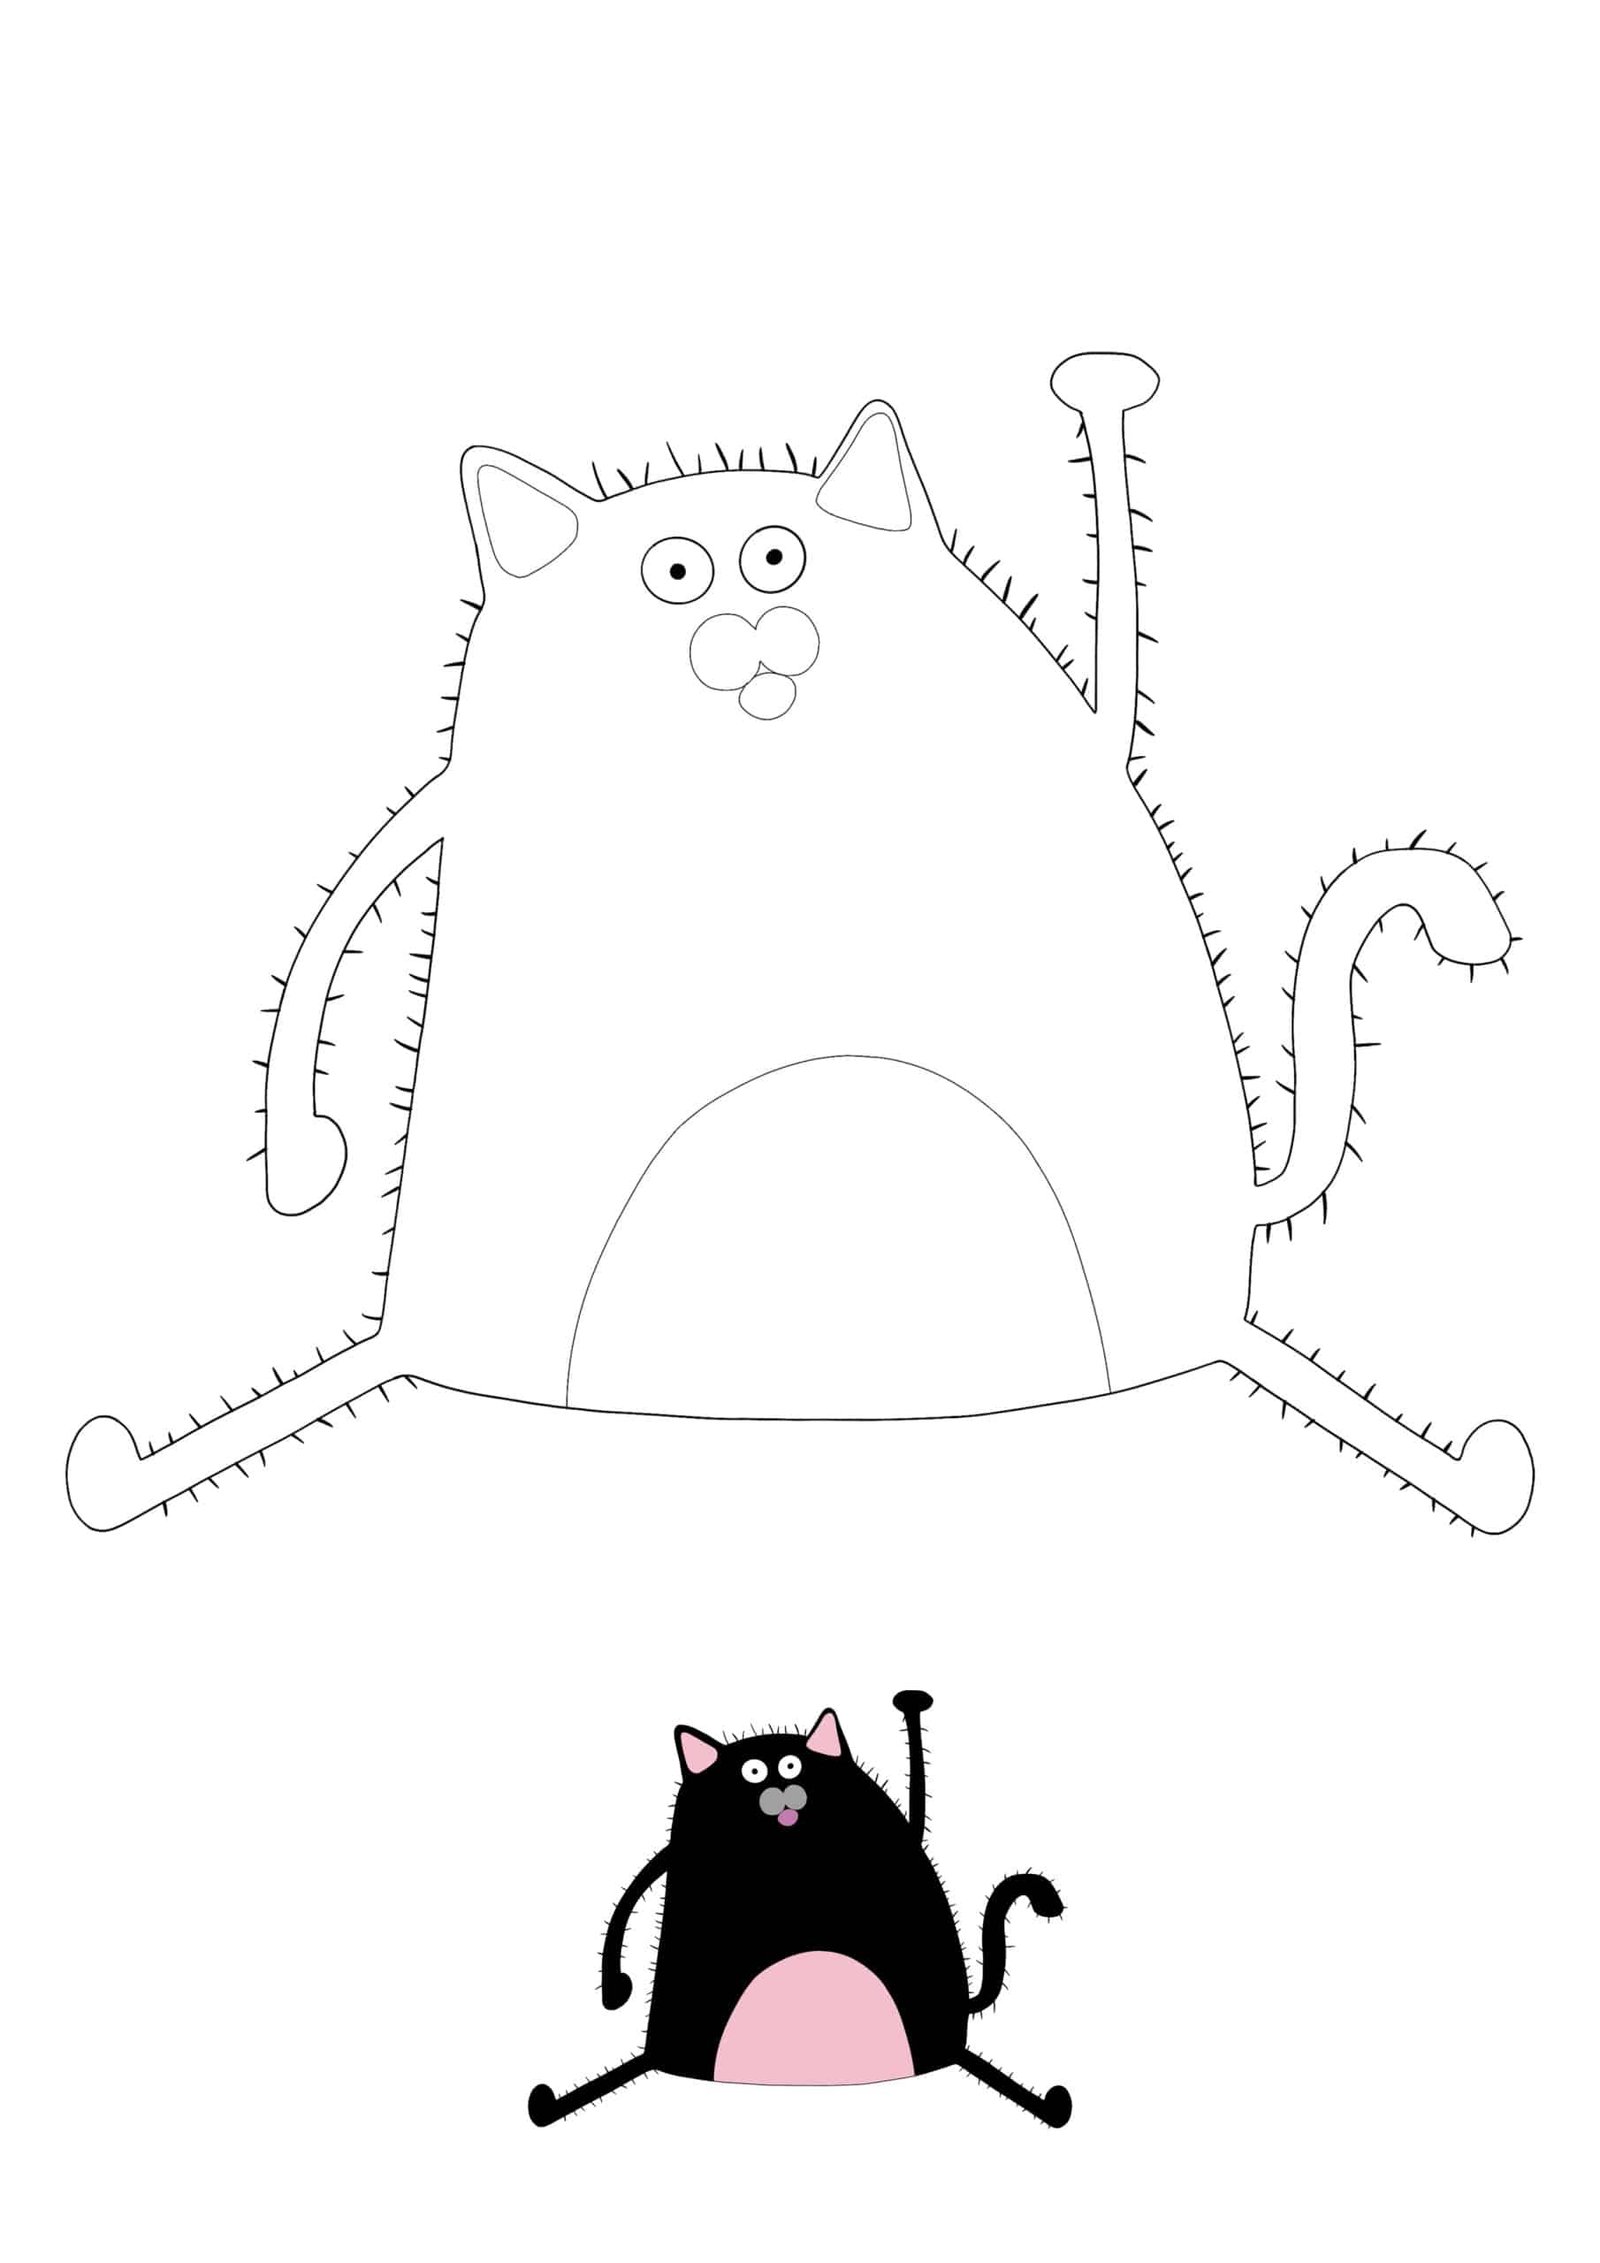 Splat The Cat coloring sheet for kids